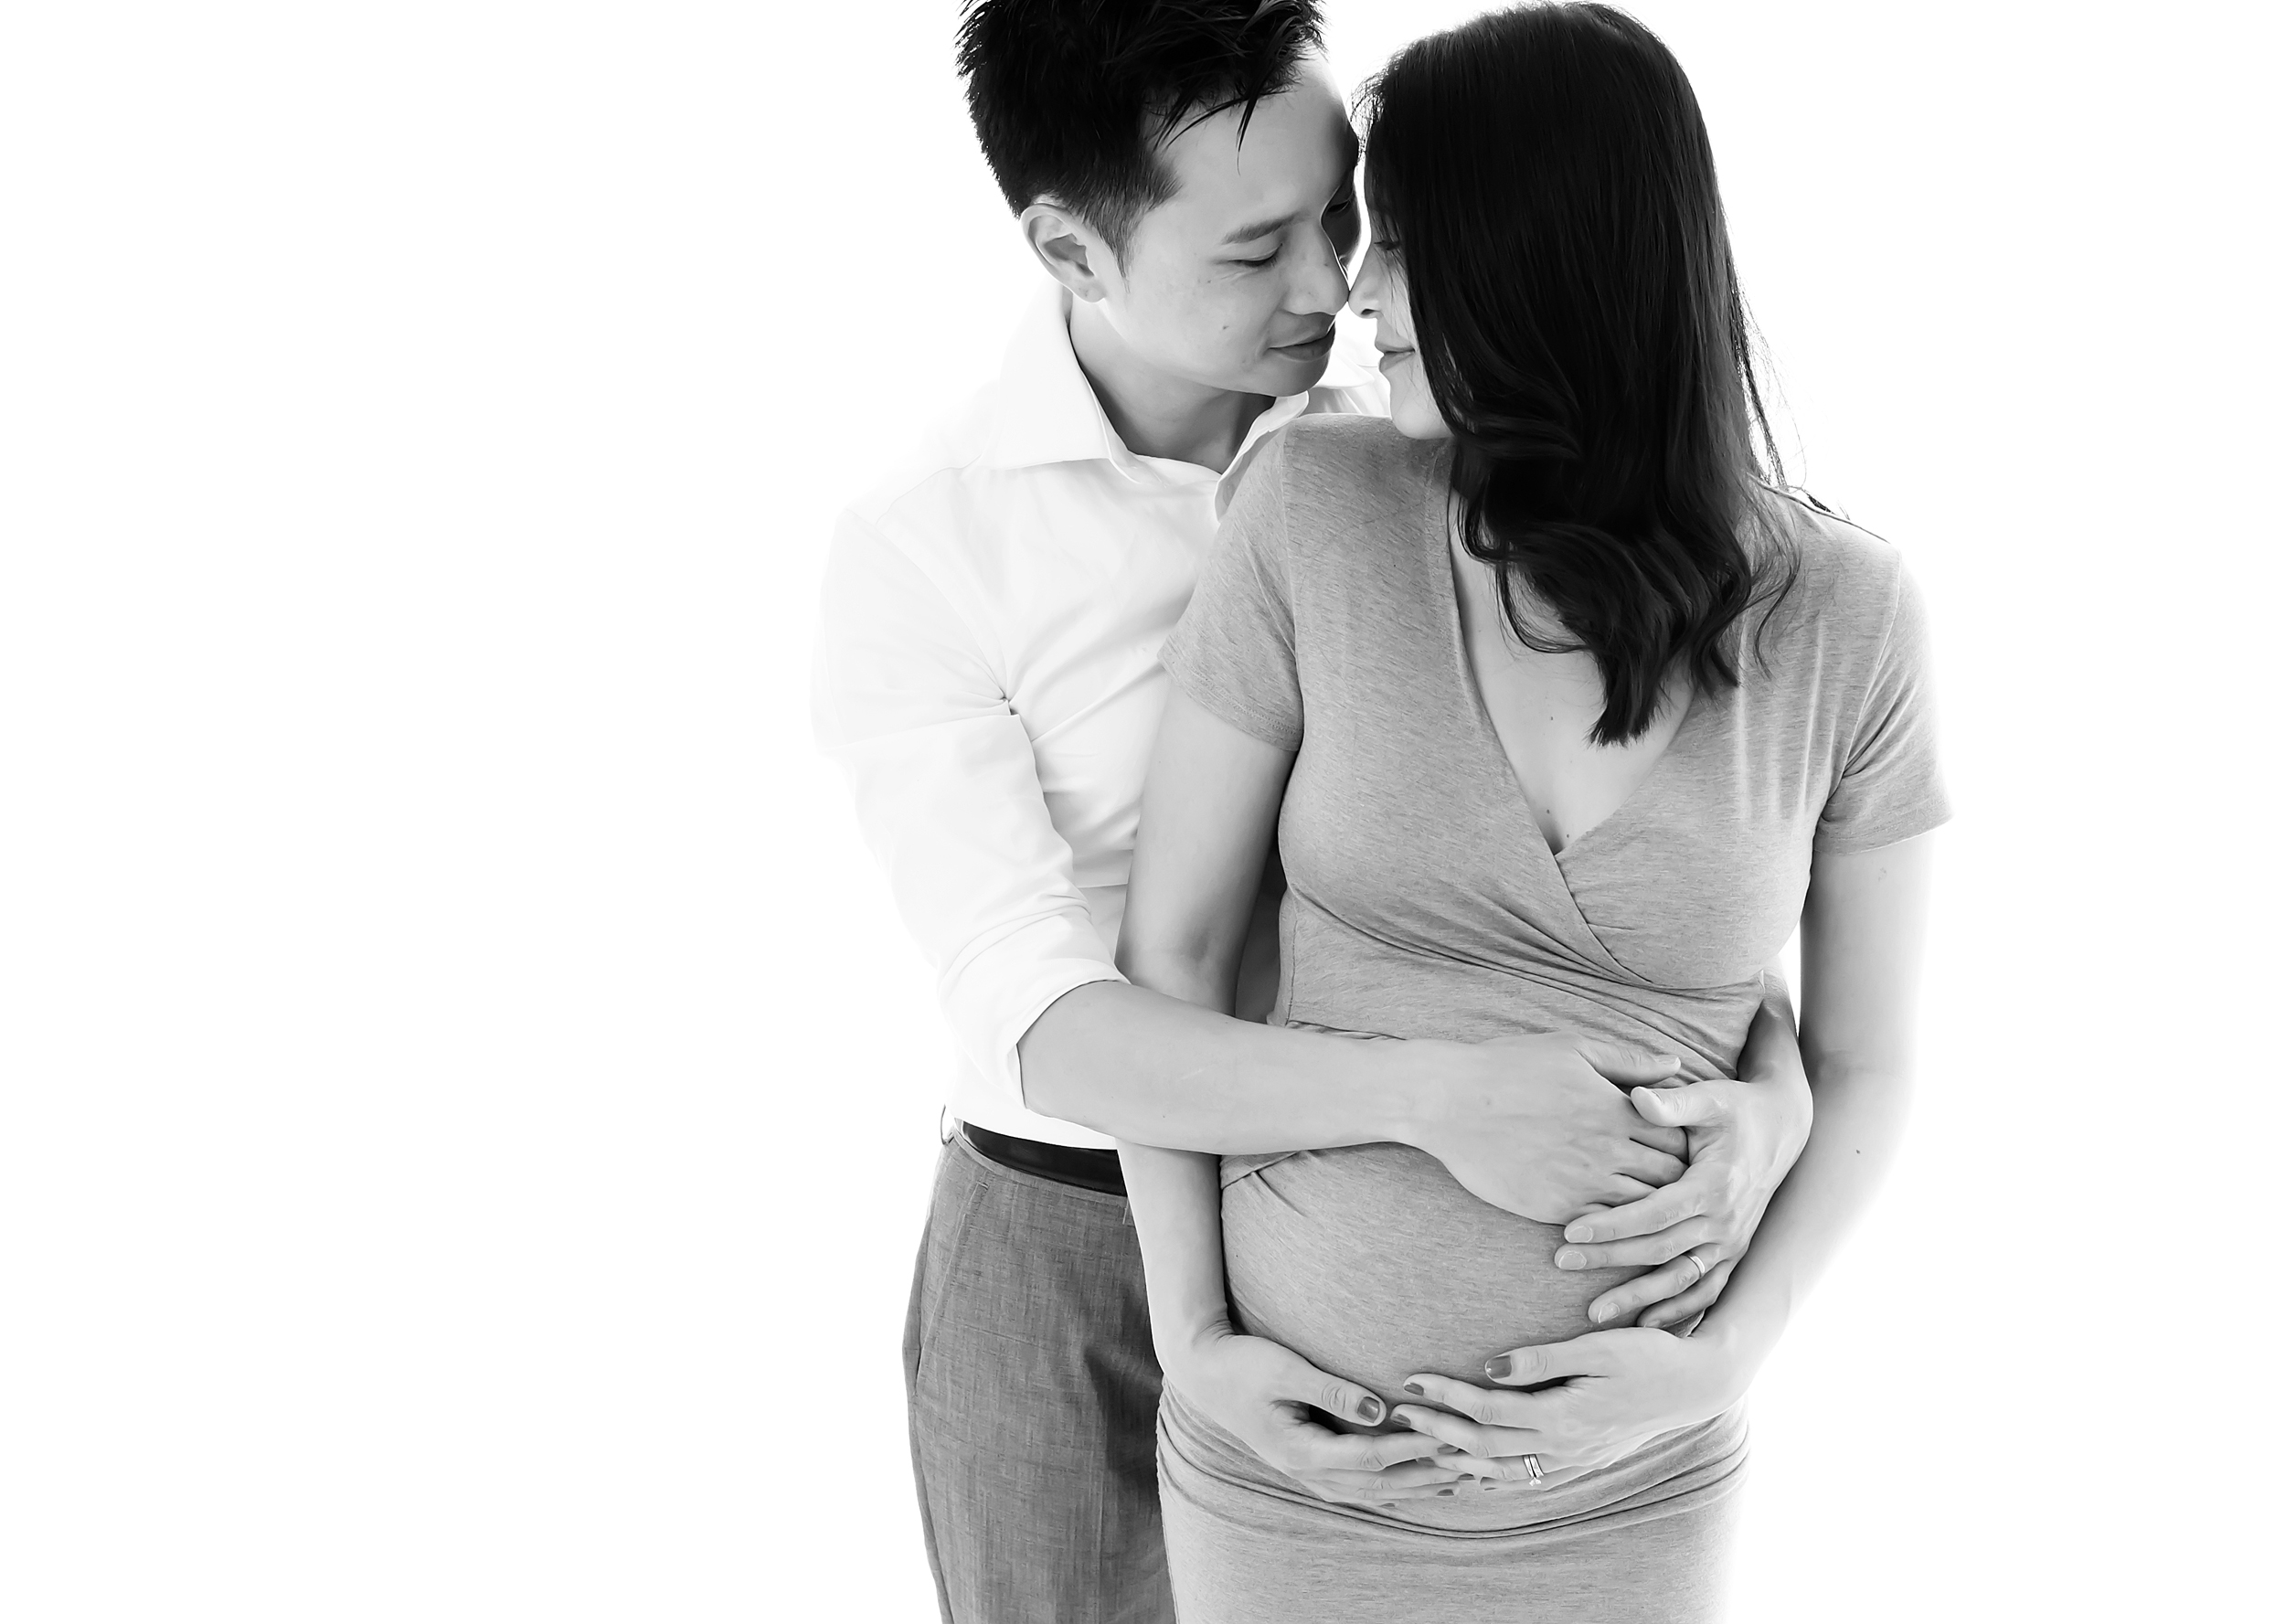 A natural photo of a new mum and dad during their maternity photo shoot in Melbourne